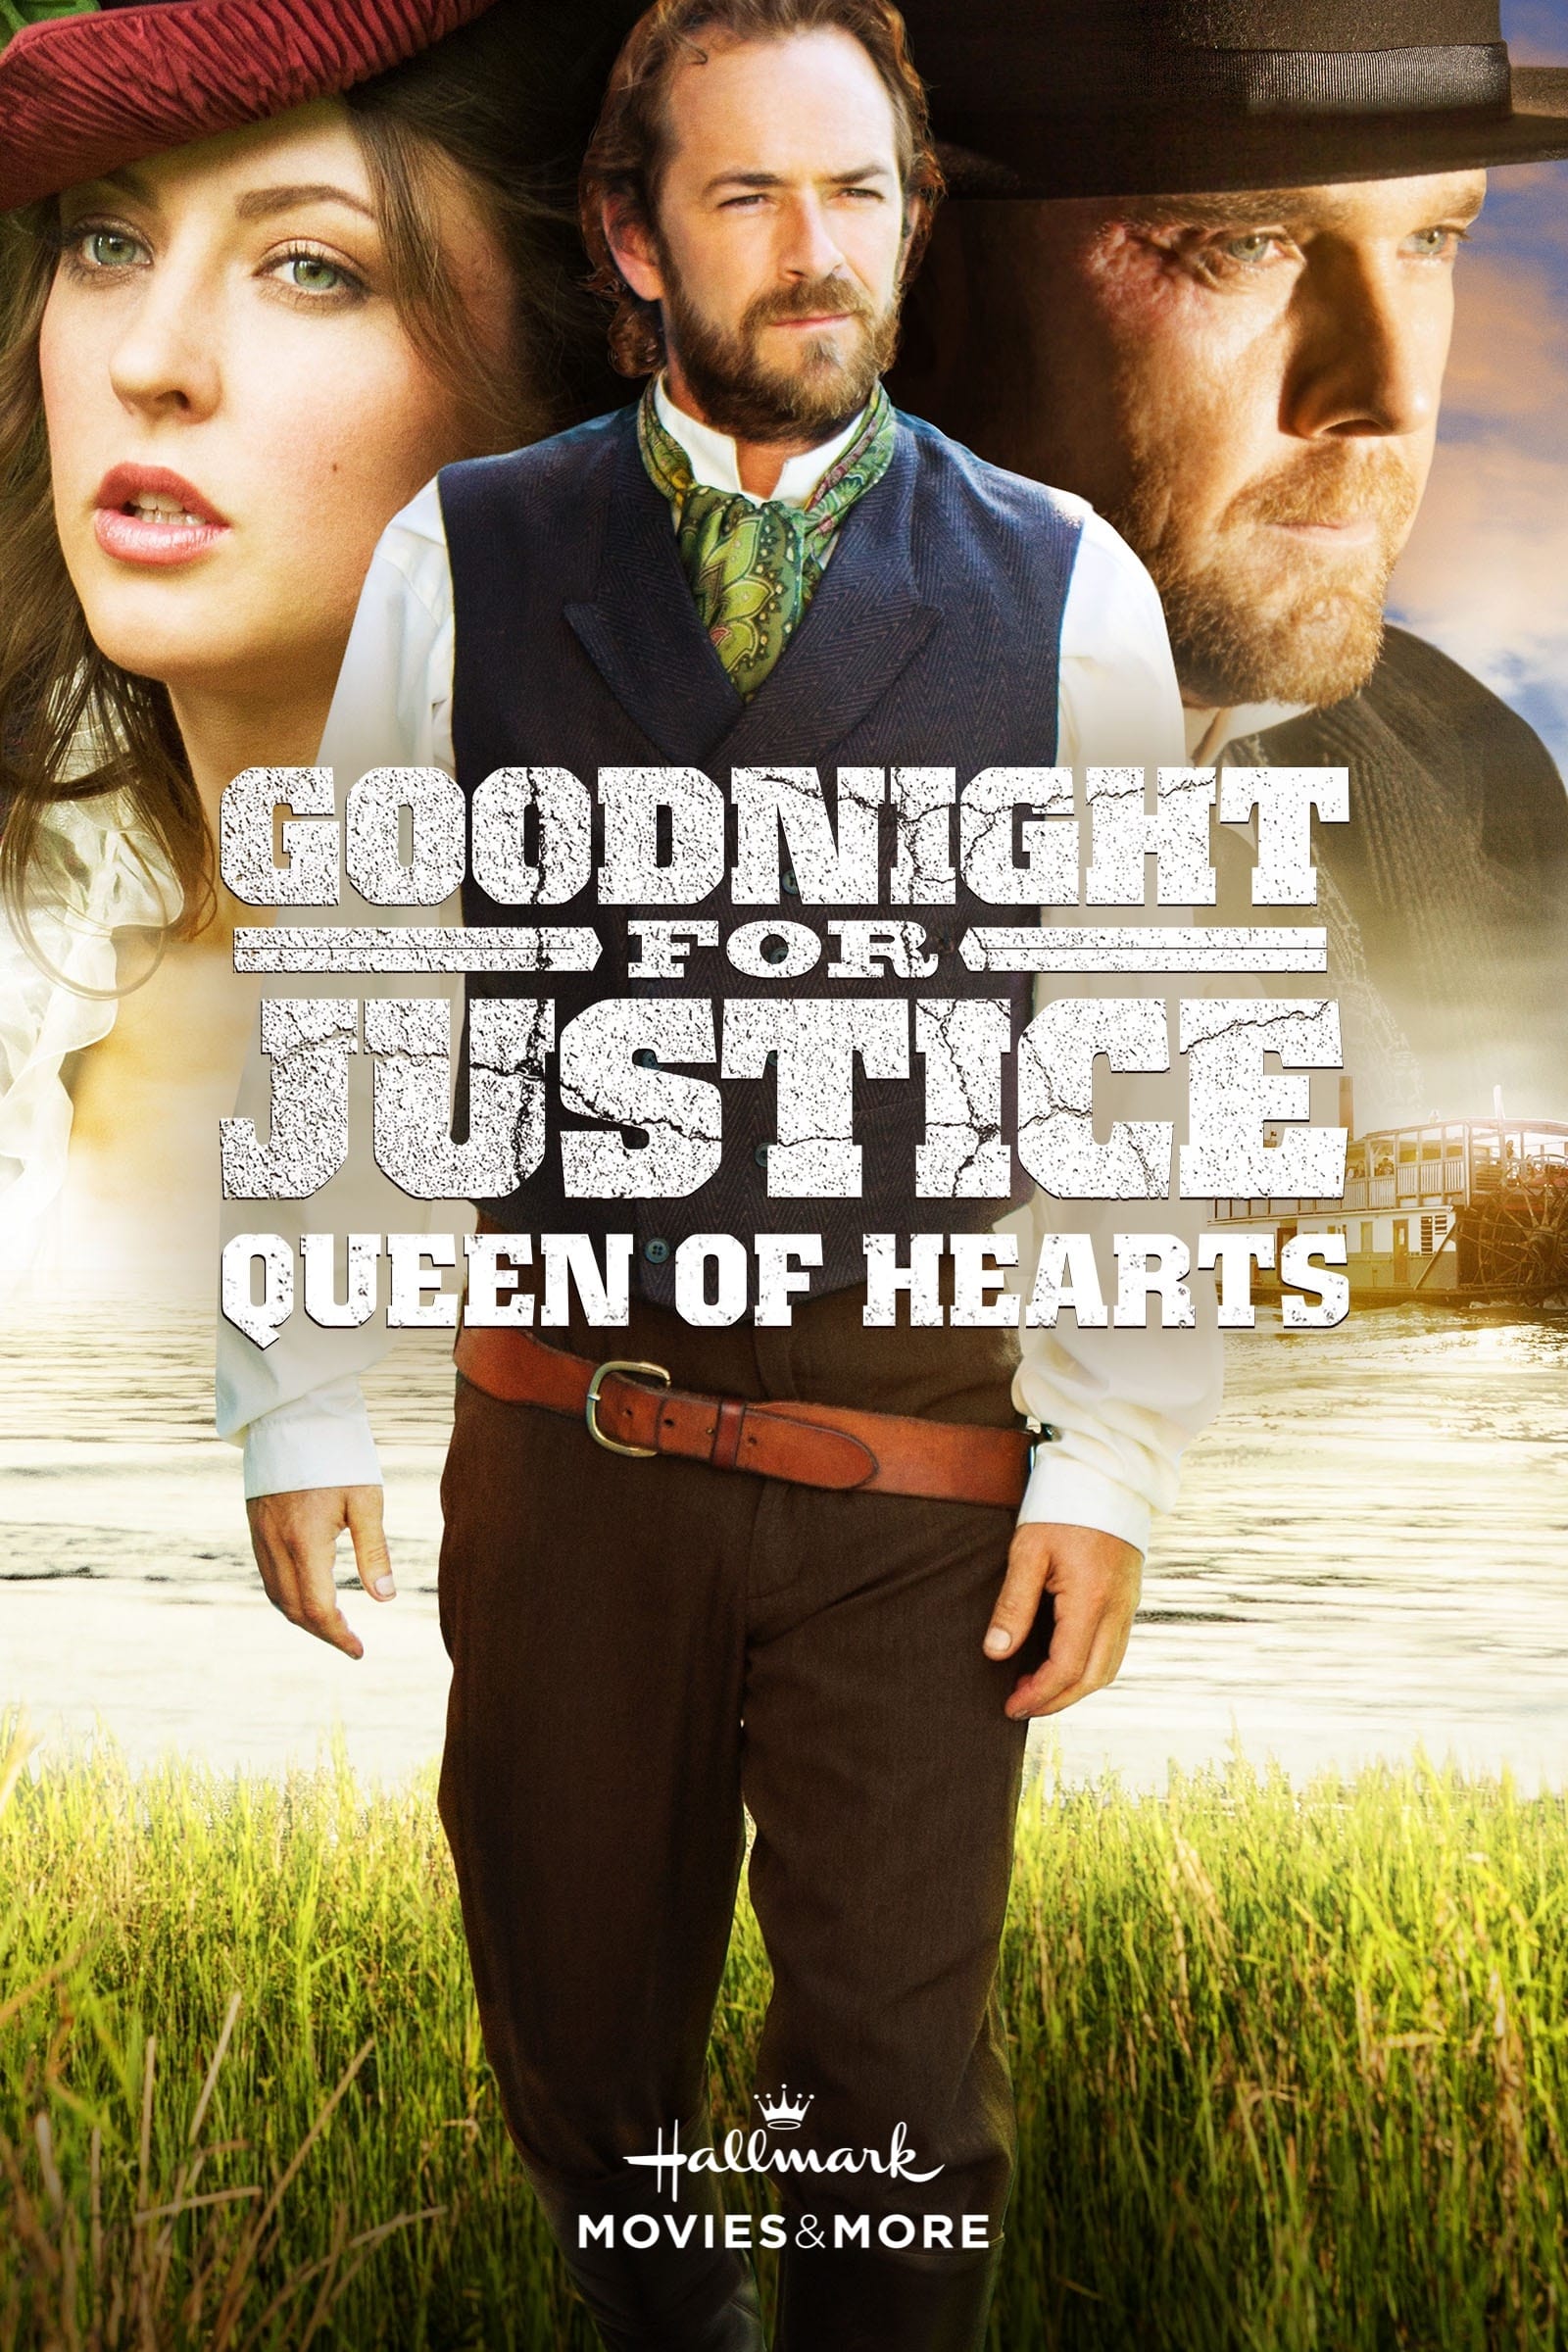 Goodnight for Justice: Queen of Hearts (2013)